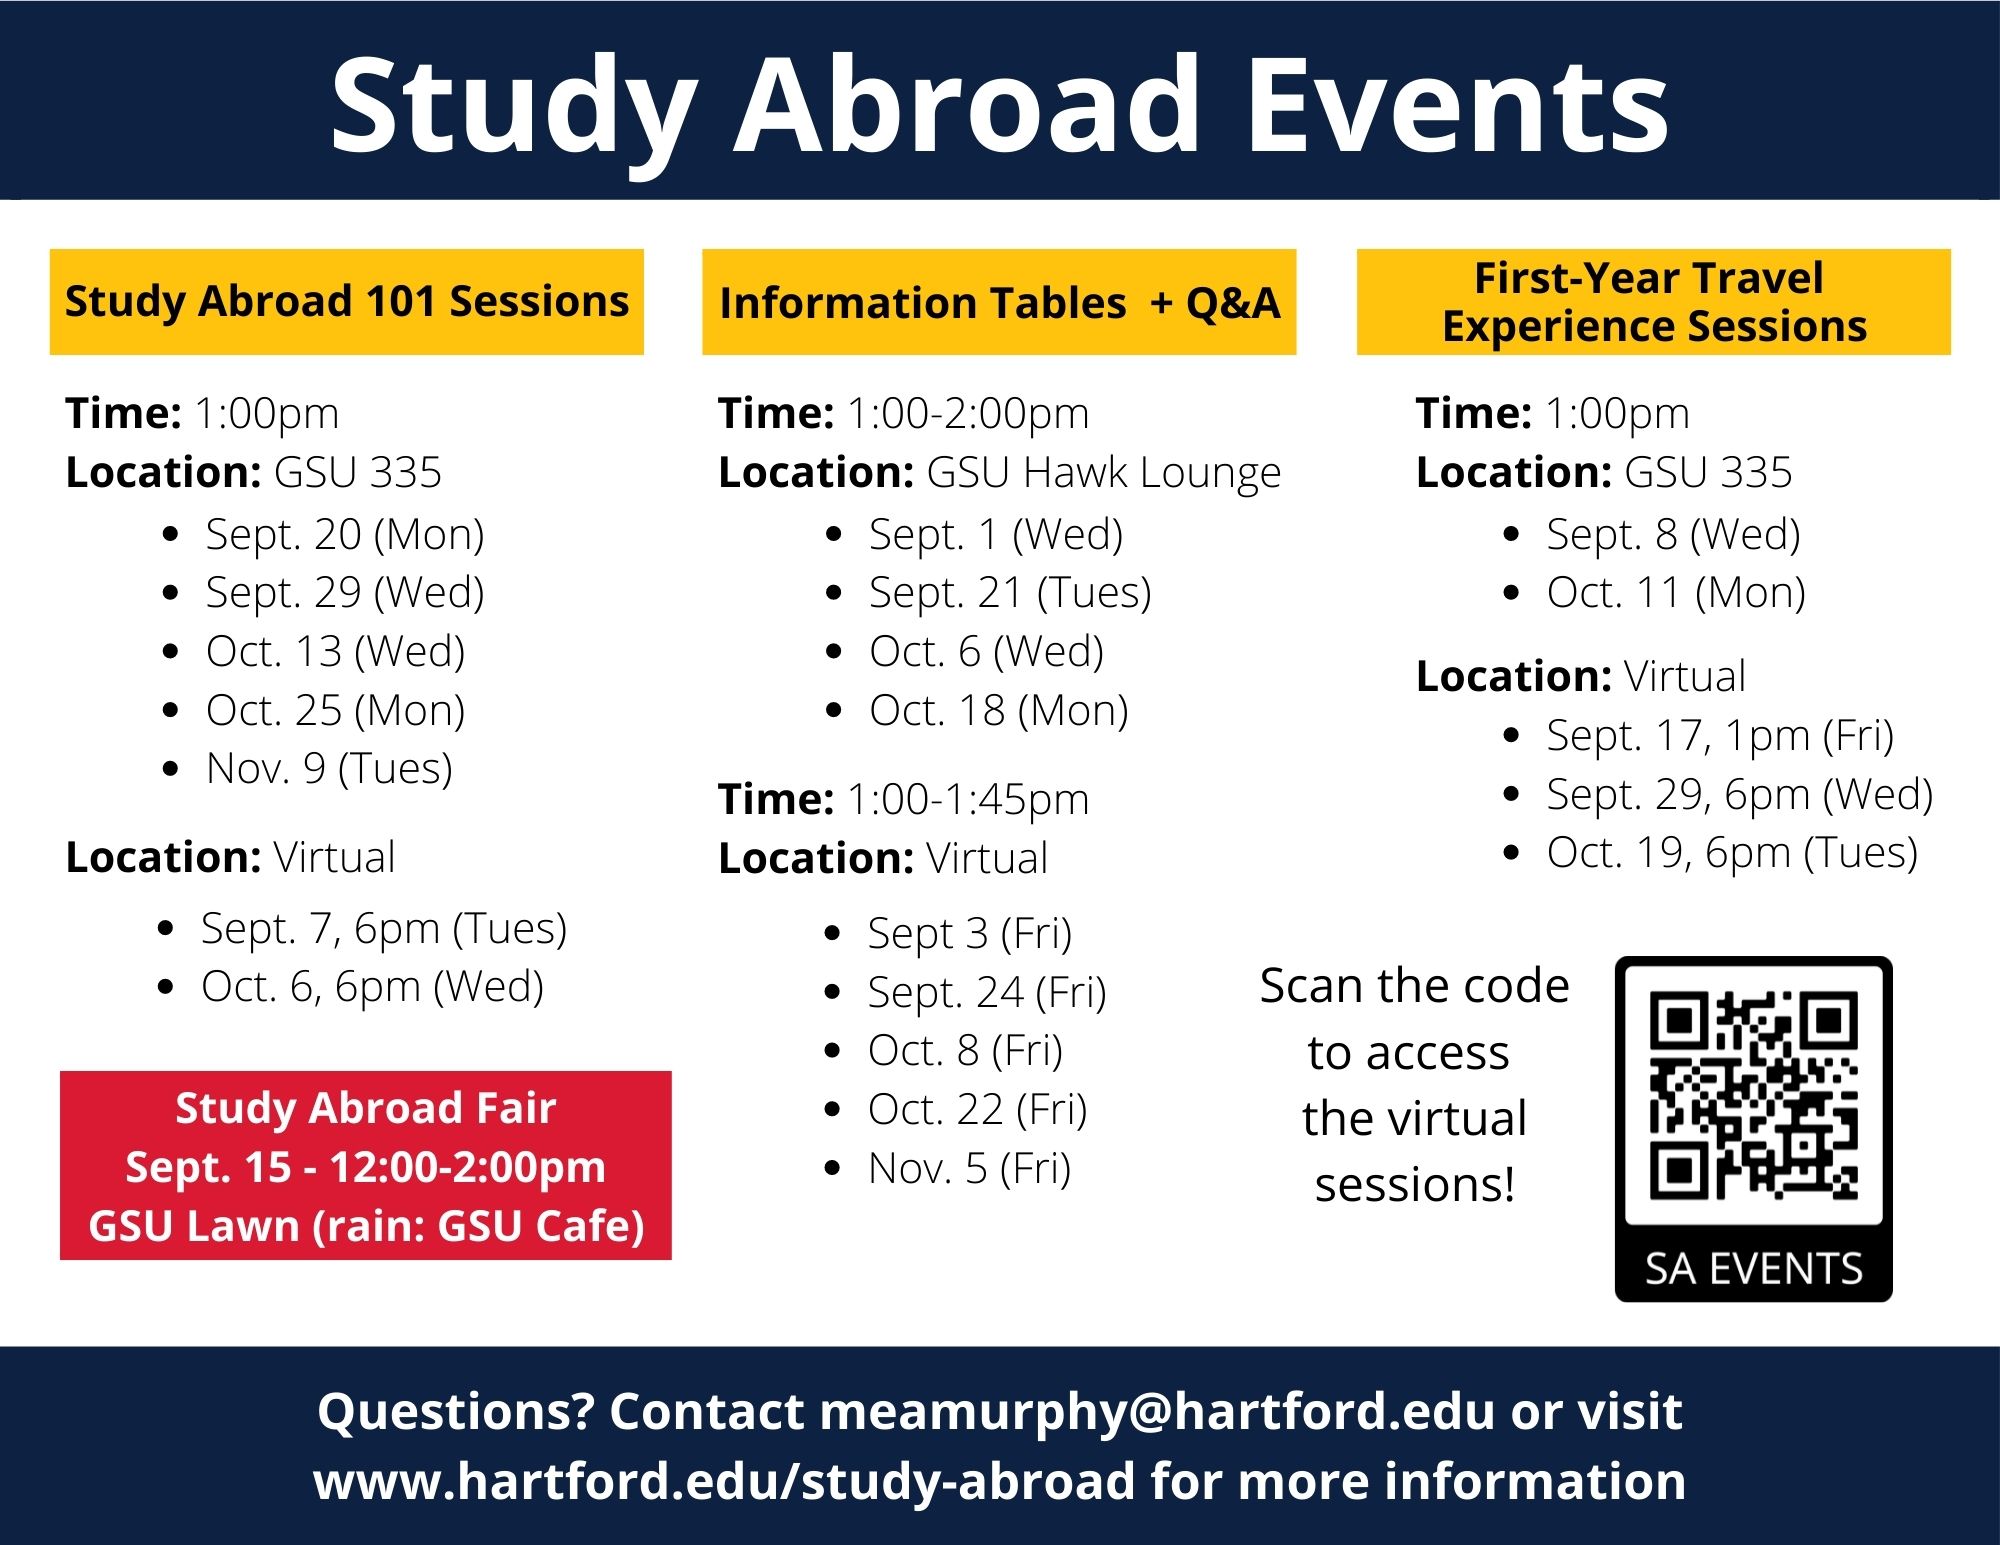 Fall 2021 Study Abroad Events